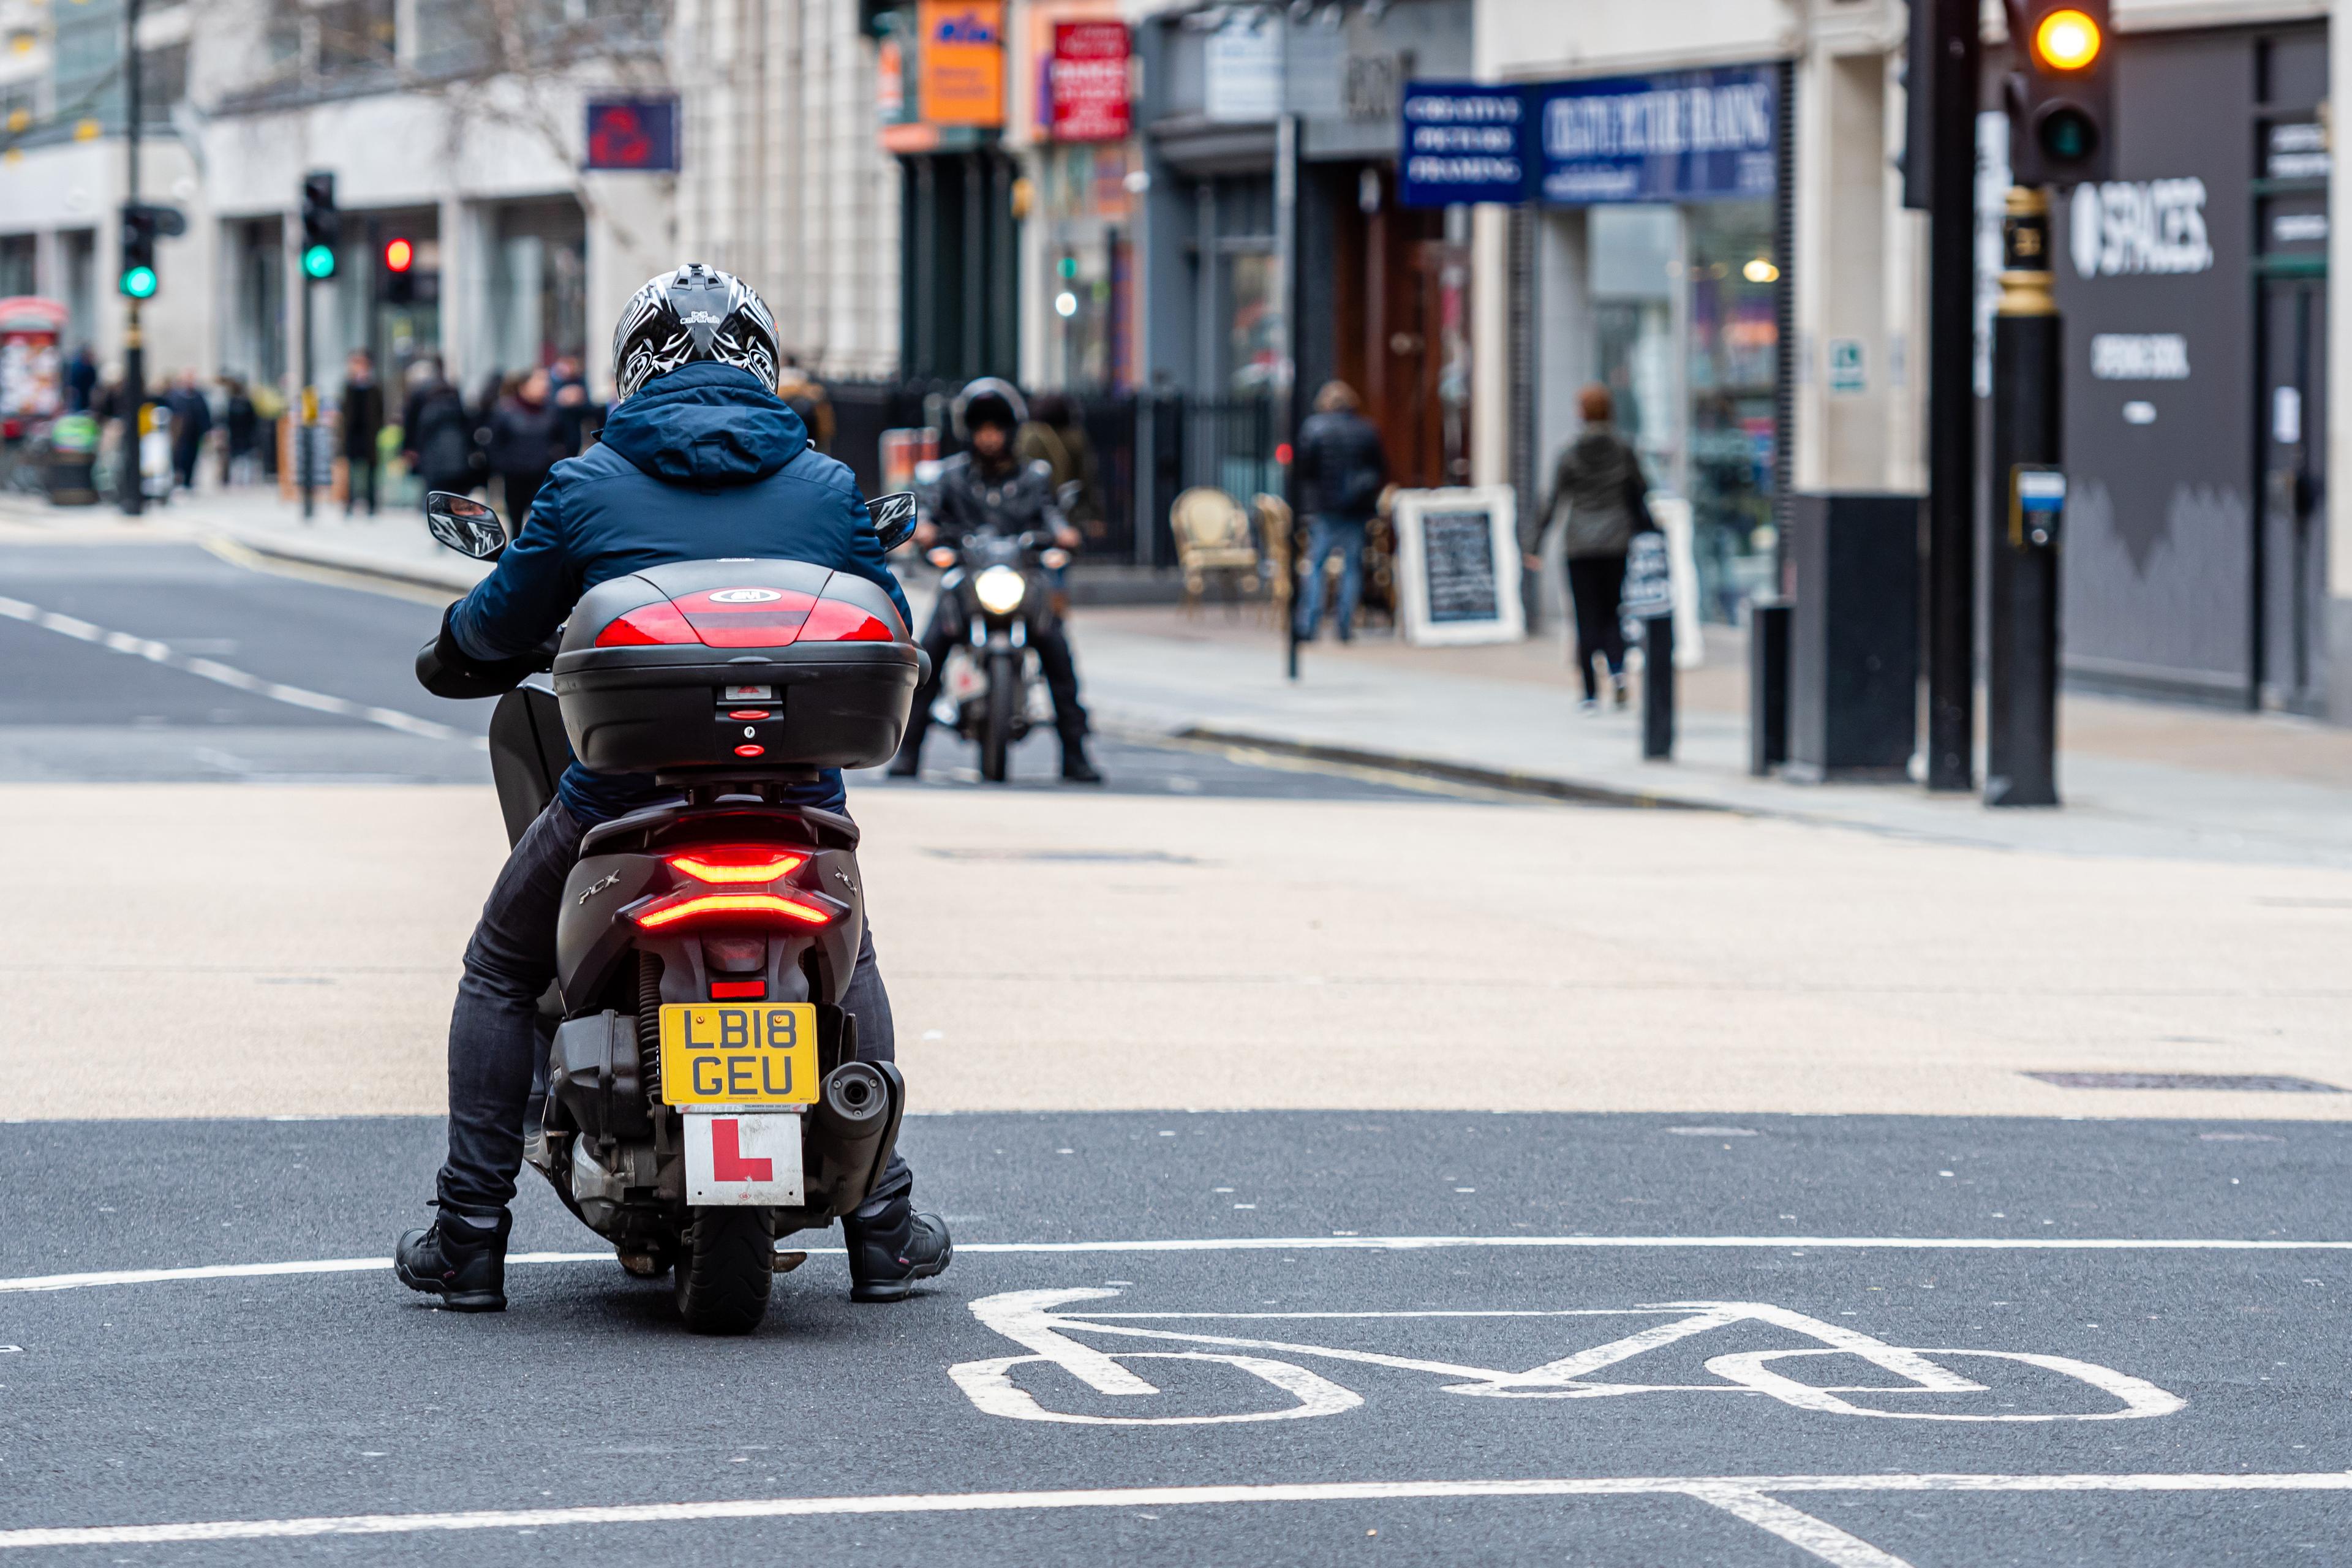 What options does Zego offer for scooter delivery riders?